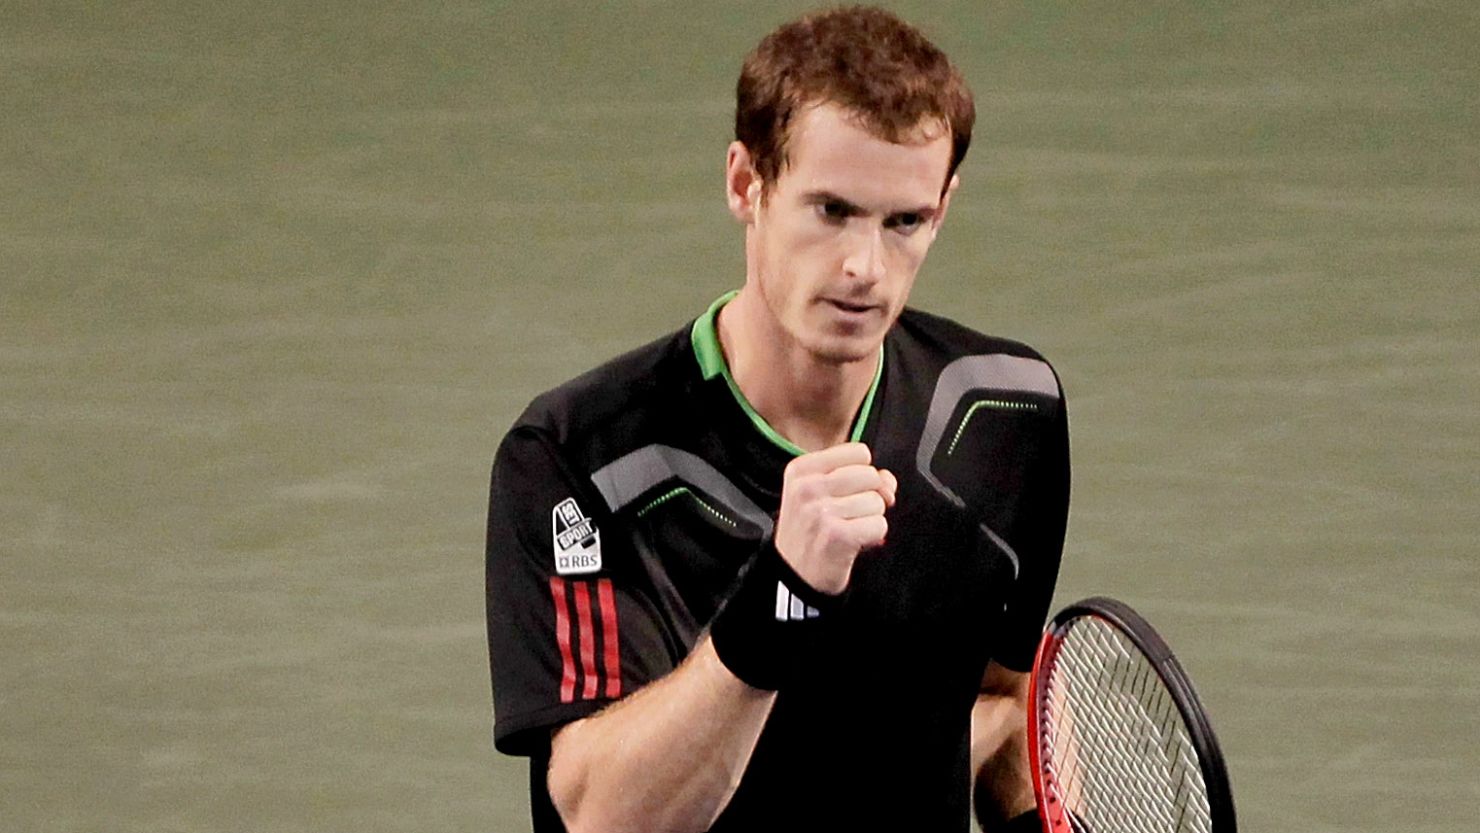 Scottish tennis star Andy Murray has won 19 ATP Tour titles since turning pro in 2005.